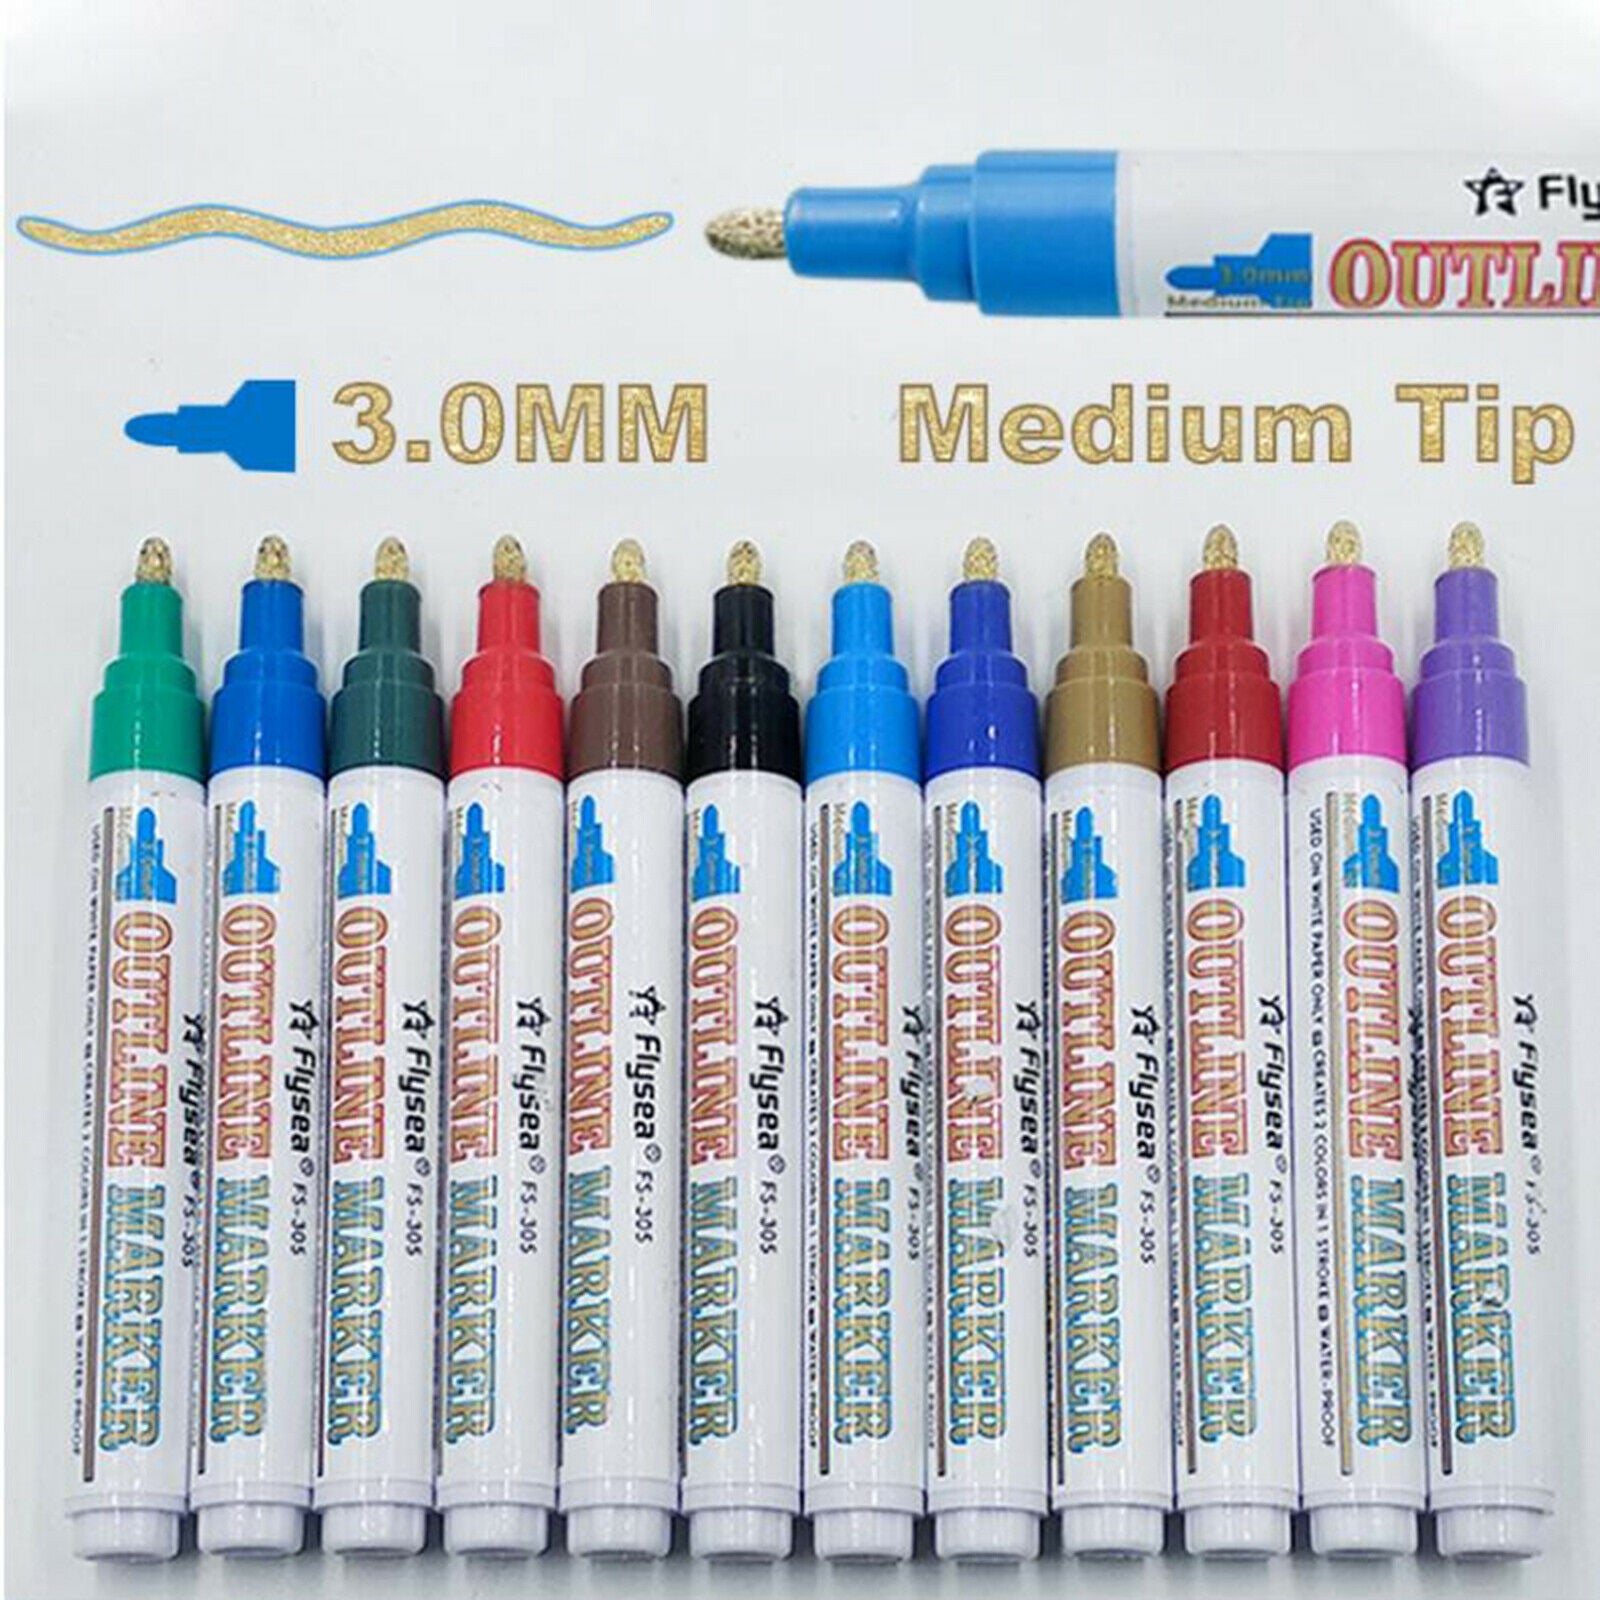 3.0mm Self-outlined Double Line Outline Pen Marker Pens for Art, Drawing Writing